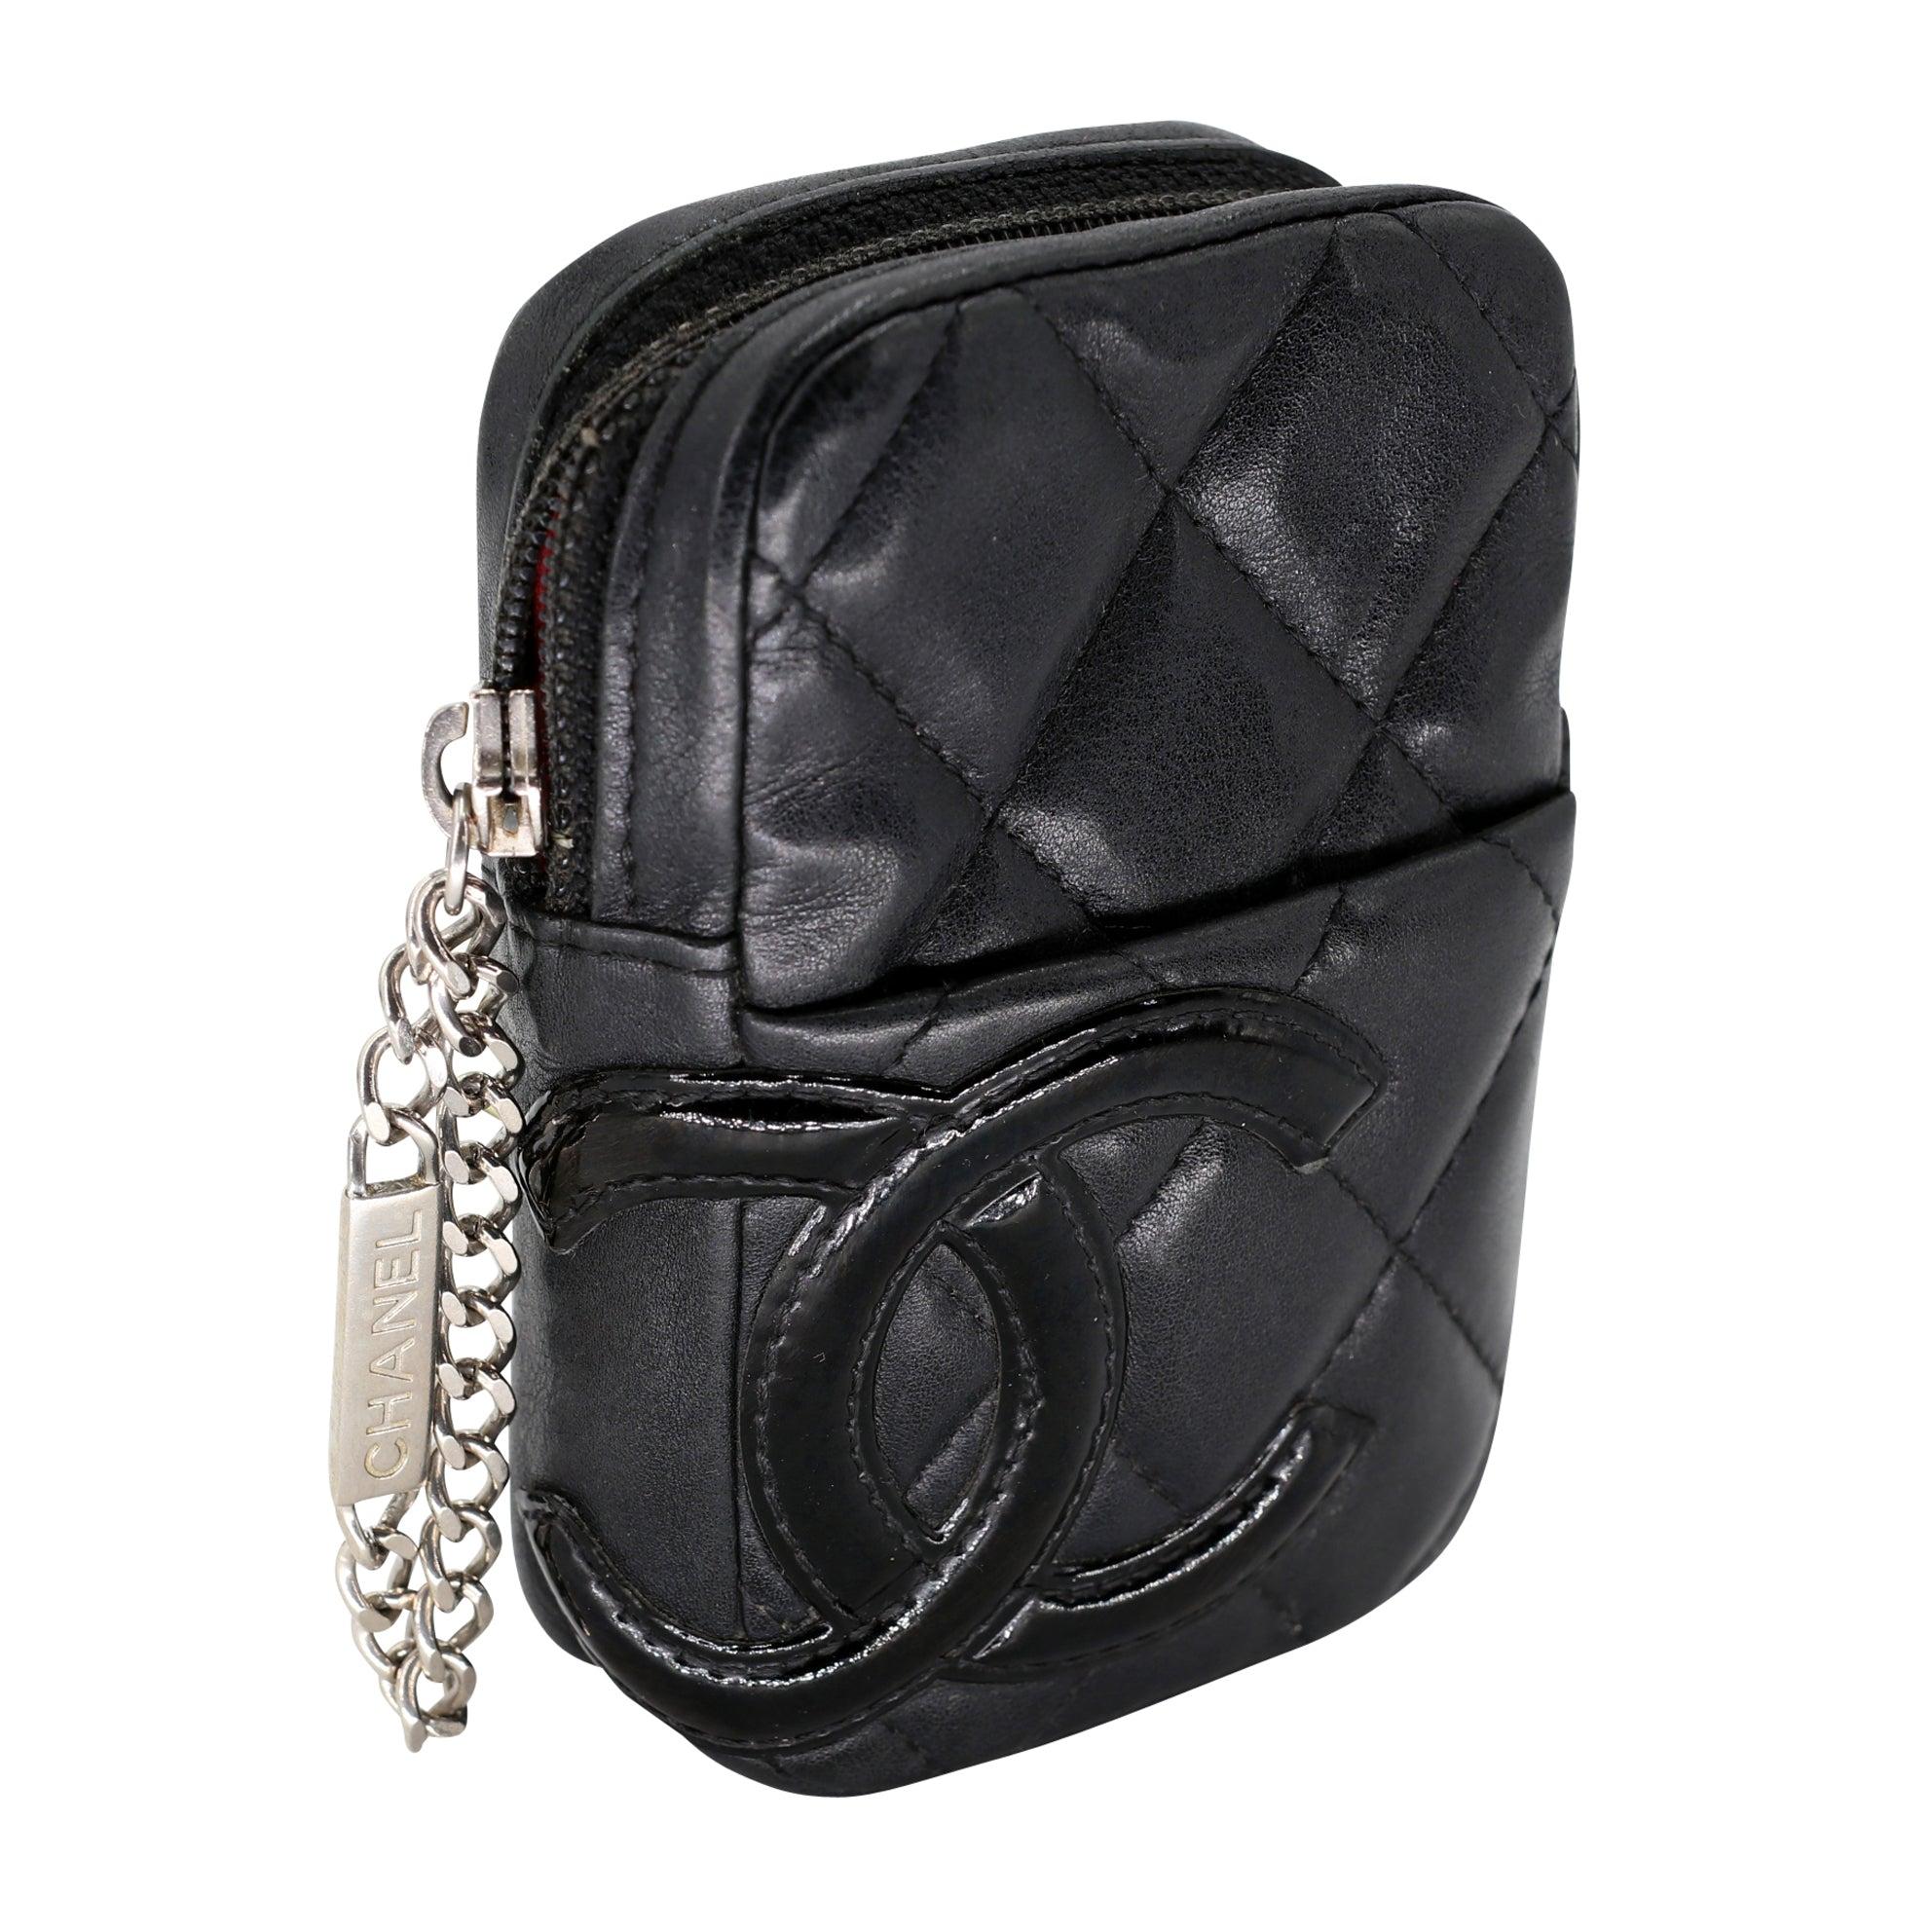 If you are seeking a luxurious and chic way to organize your essentials coins and credit cards, look no further than this gorgeous Chanel Quilted Lambskin Leather Zip pouch. This stunning piece features a single wrap around zip closure with the